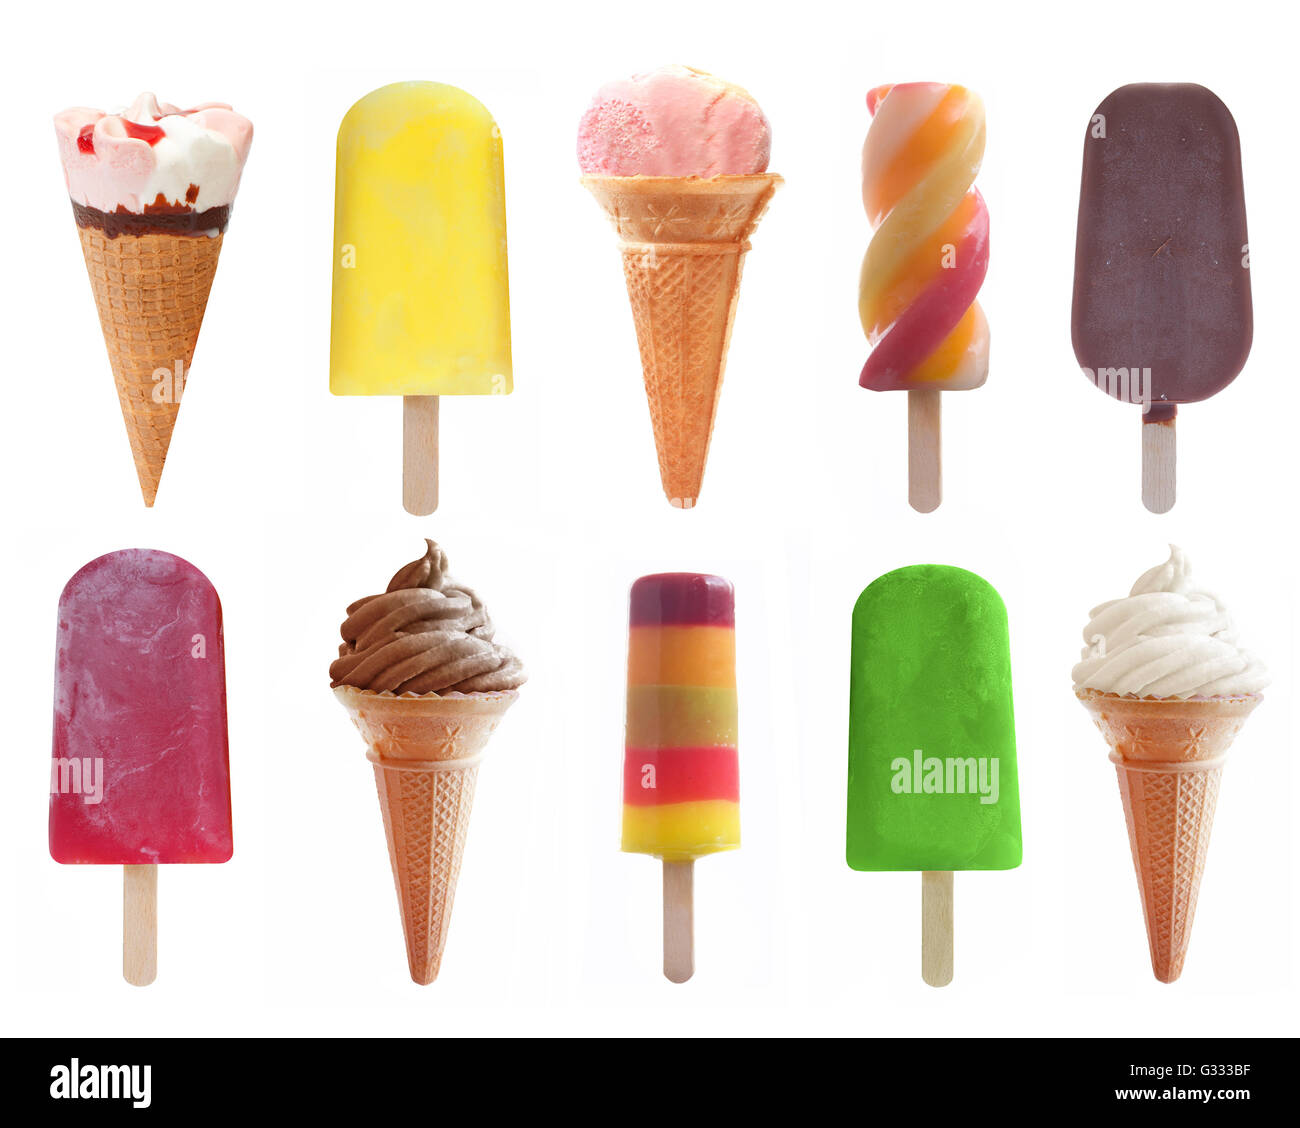 Various flavors of icecream, ice lollies and popsicles as a collection over a white background Stock Photo